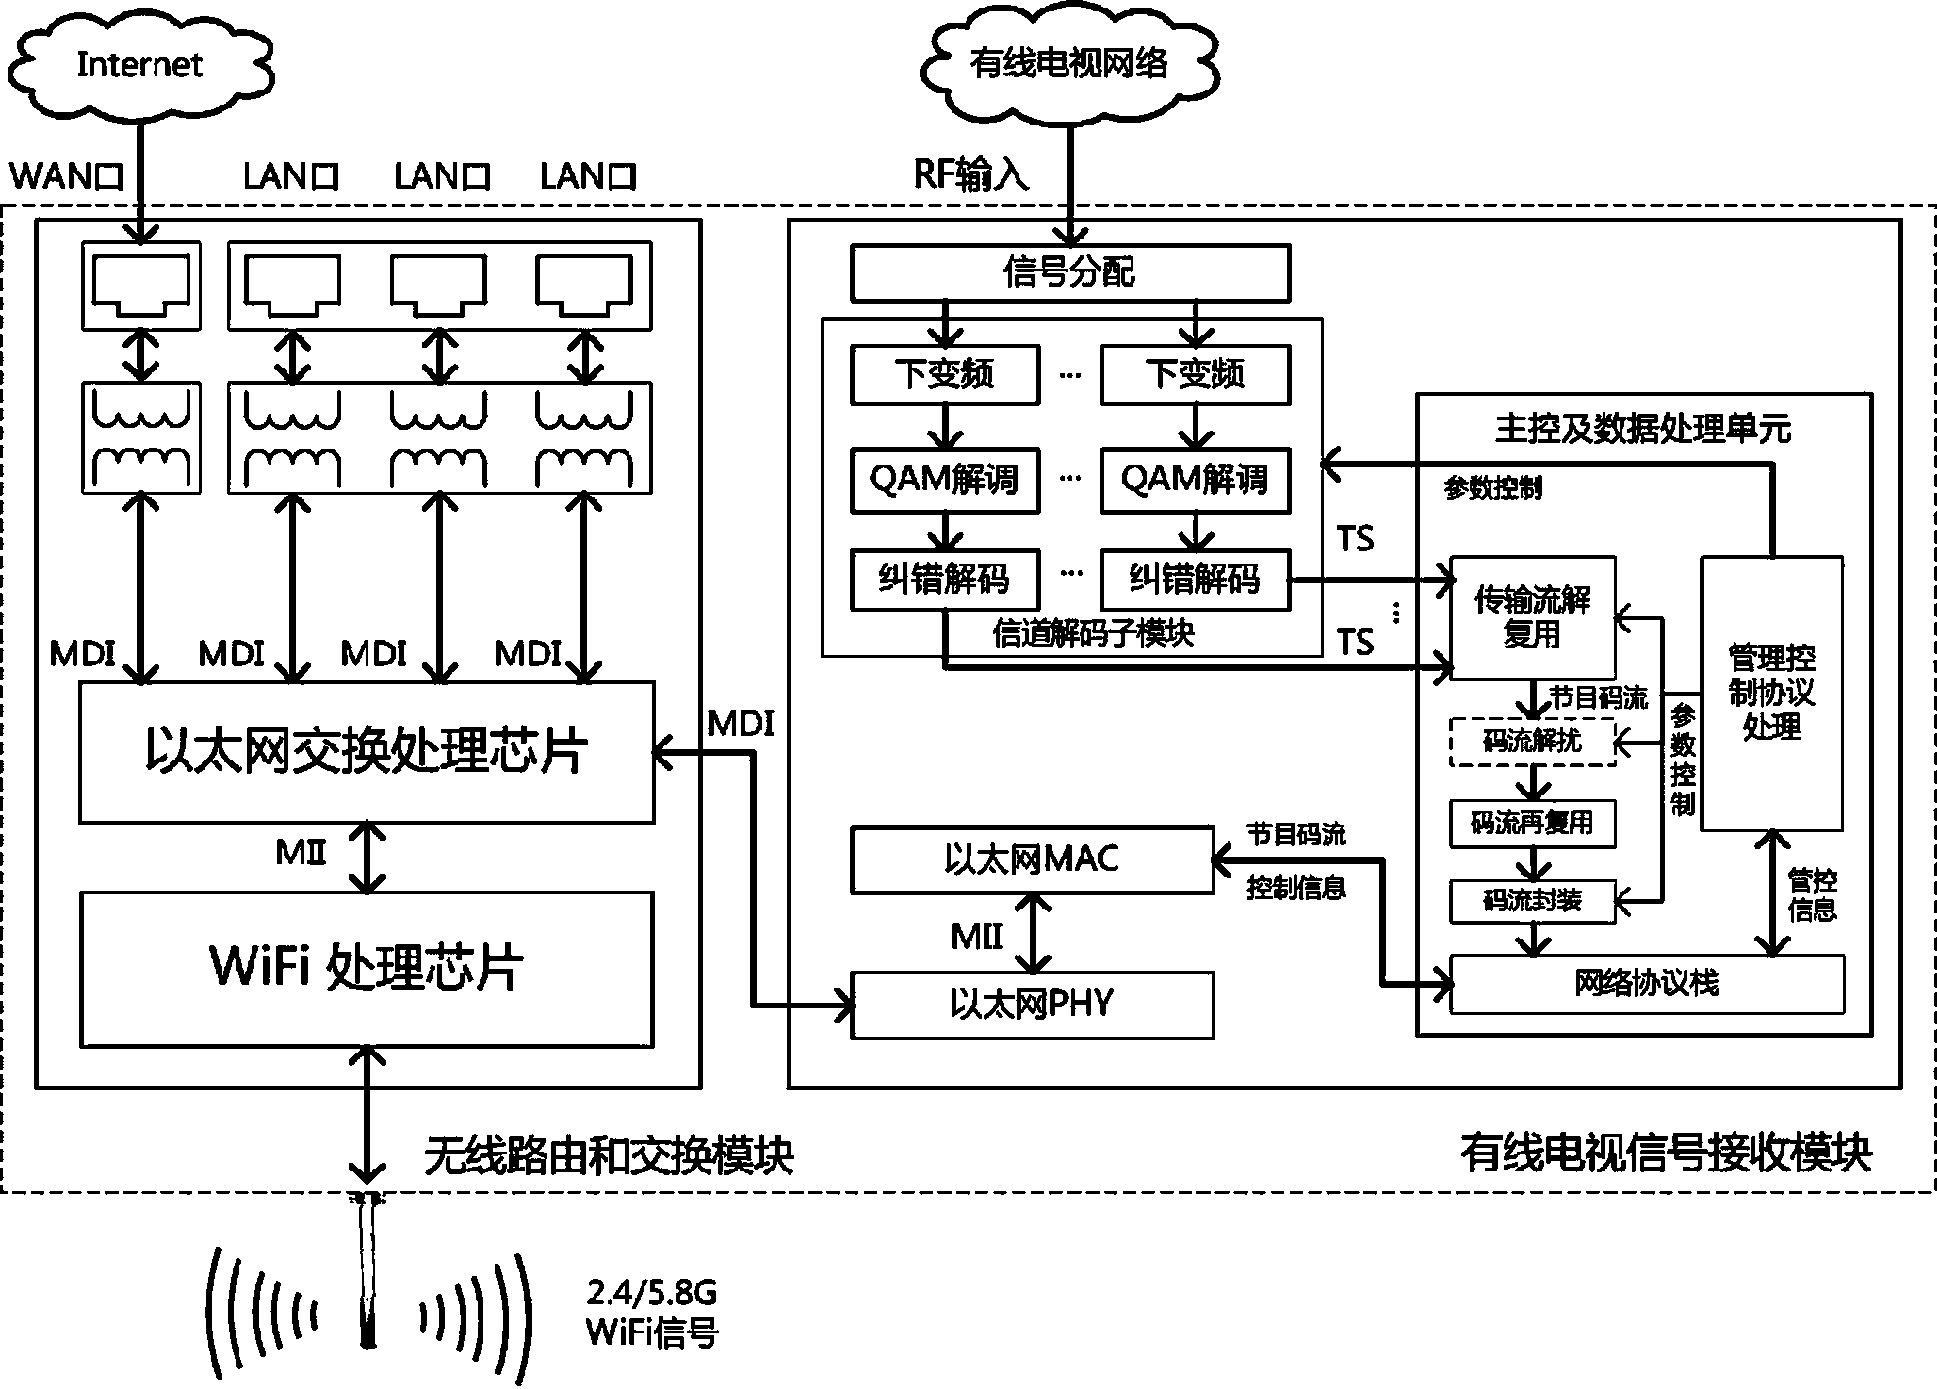 WIFI adapter and digital television signal distribution system using same